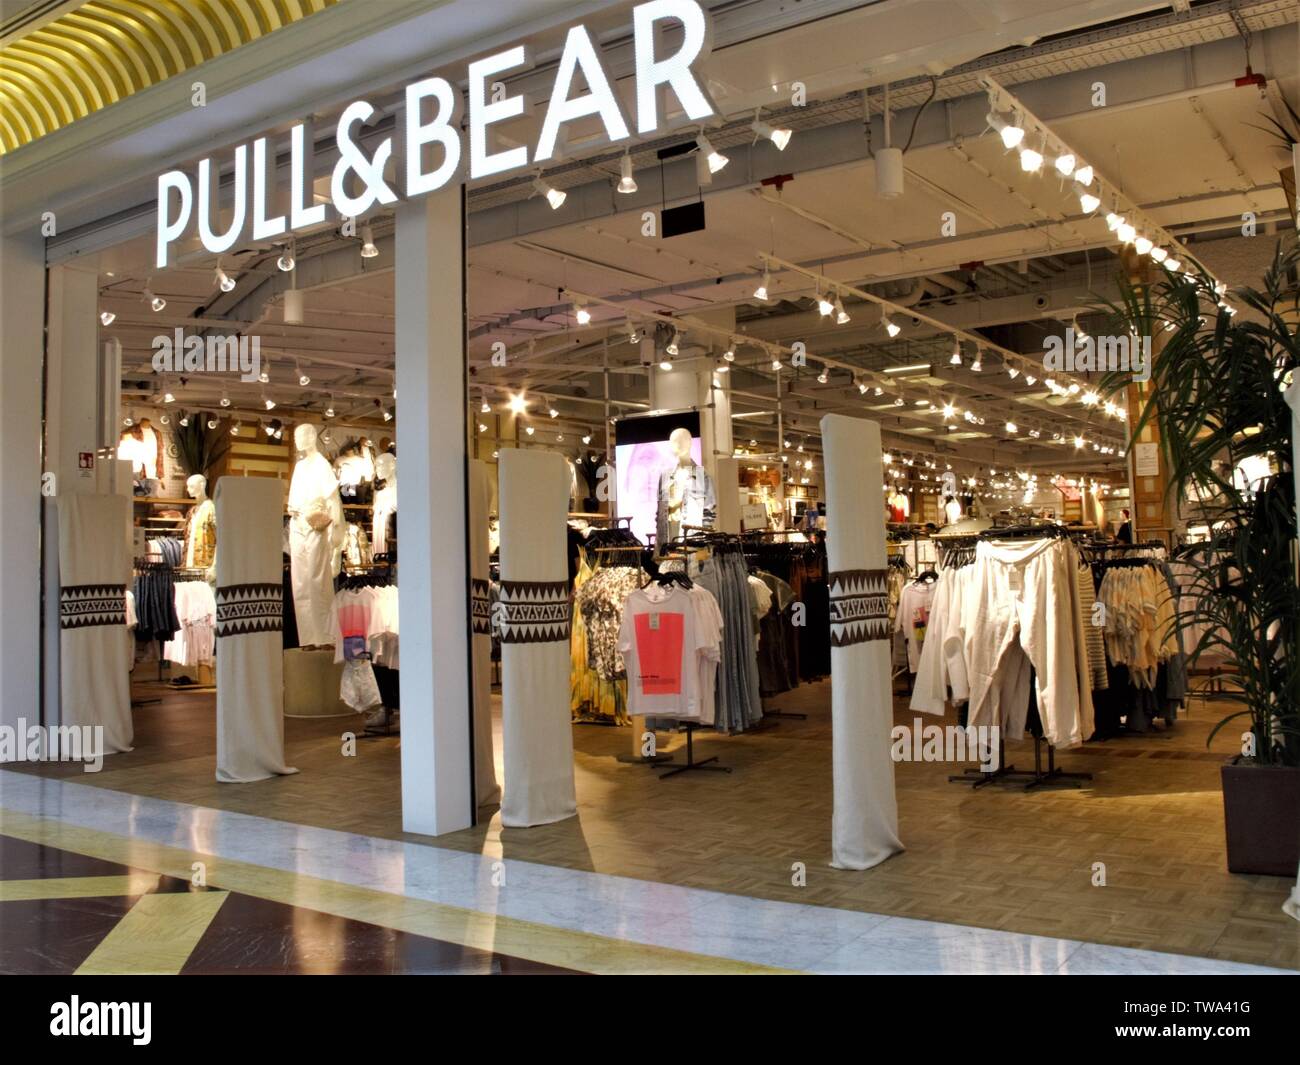 PULL&BEAR FASHION STORE ENTRANCE IN EUROMA 2 SHOPPING CENTER IN ROME Stock  Photo - Alamy